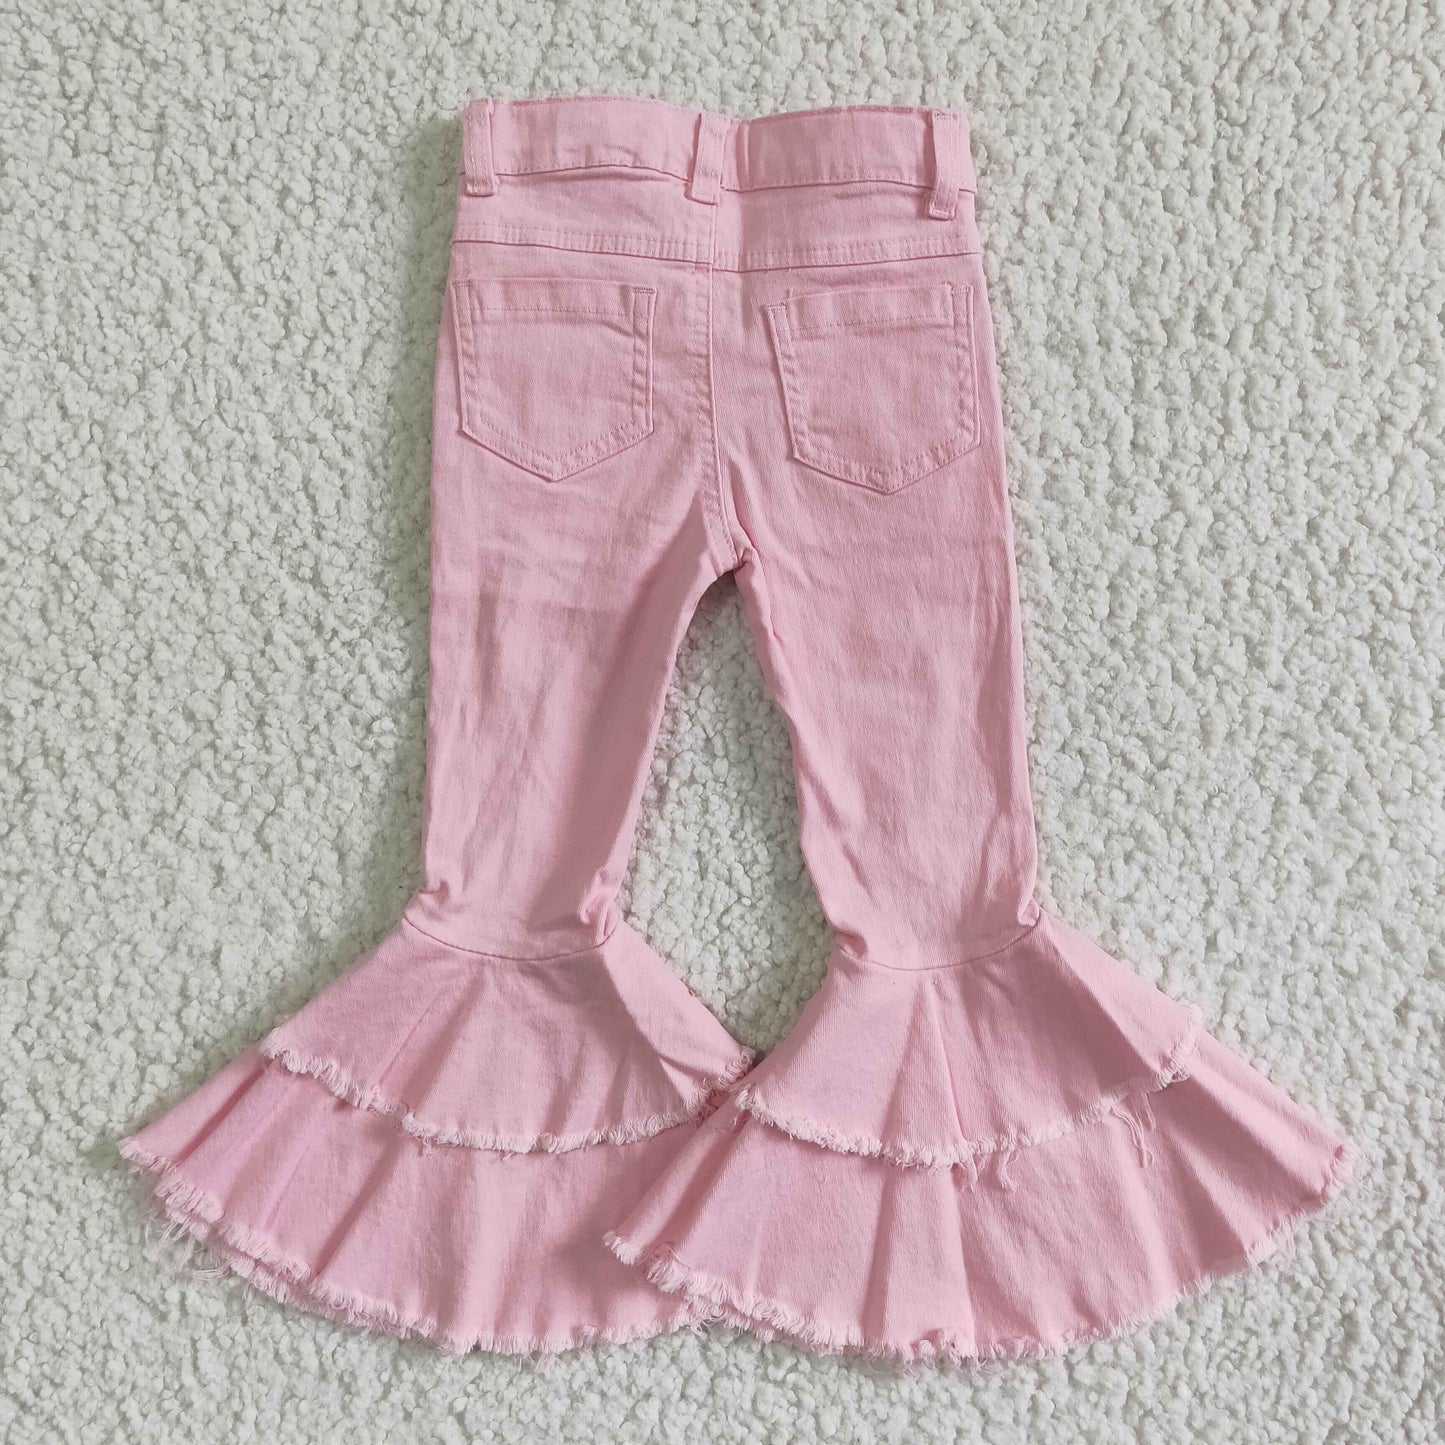 light pink denim double wide belles with hole